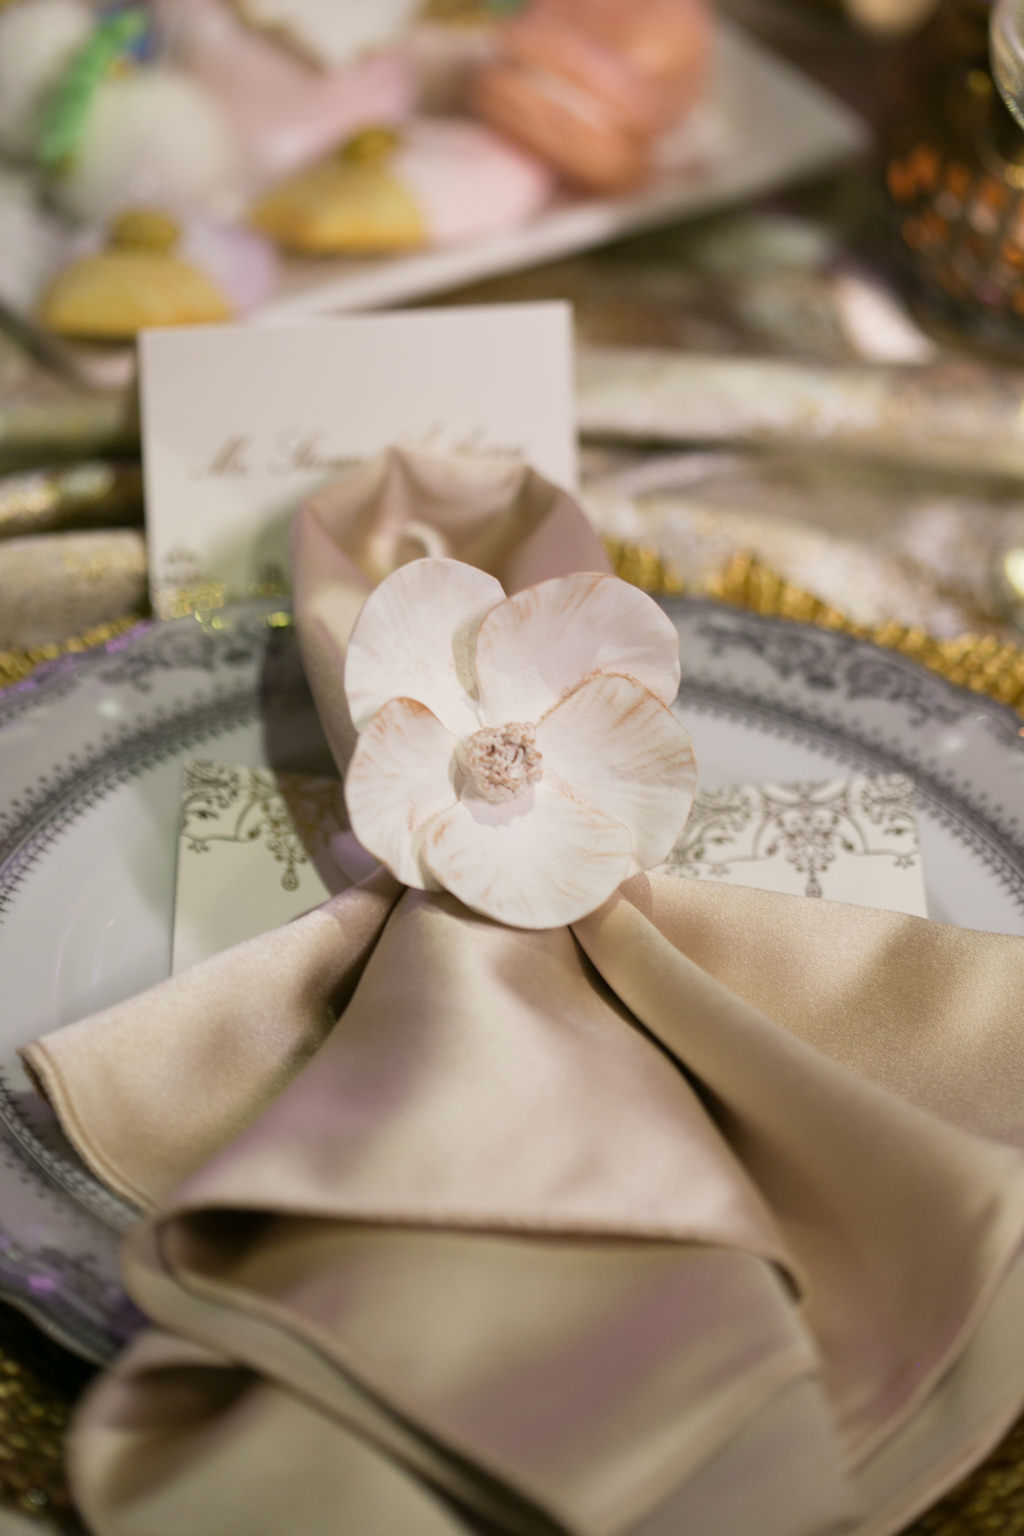 Delicate Floral Napkin Ring with Cream Satin Napkin | French Inspired Marie Antoinette Wedding Reception Decor | Over the Top Rental Linens